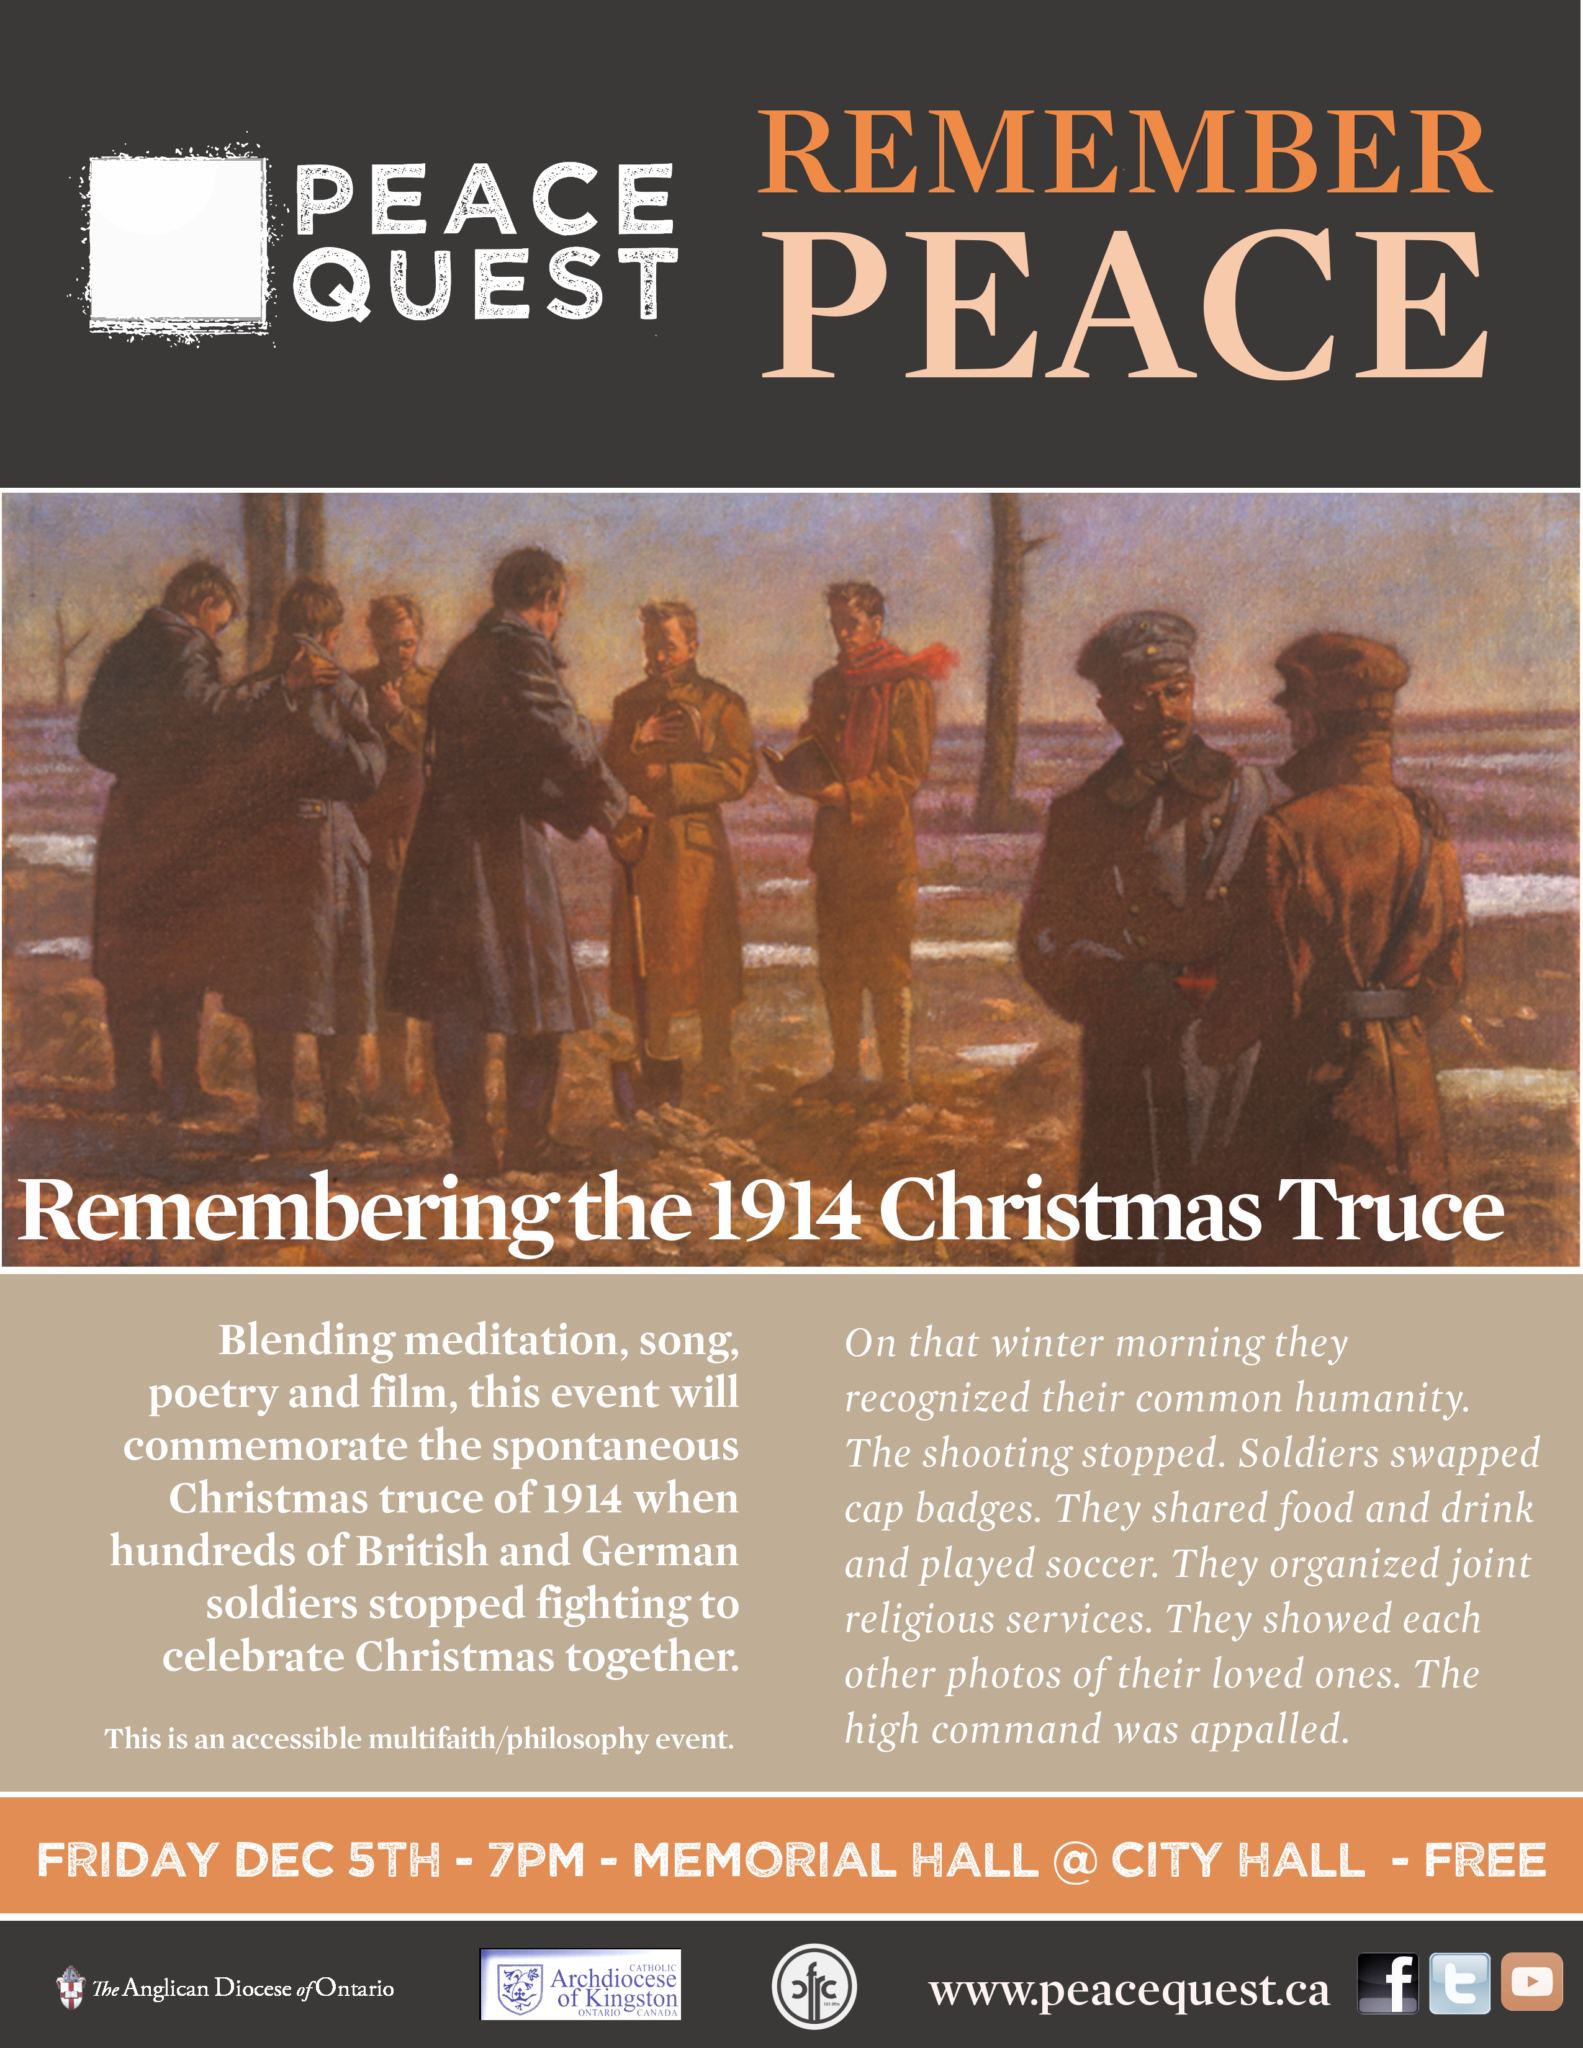 Christmas Truce Event this Friday!